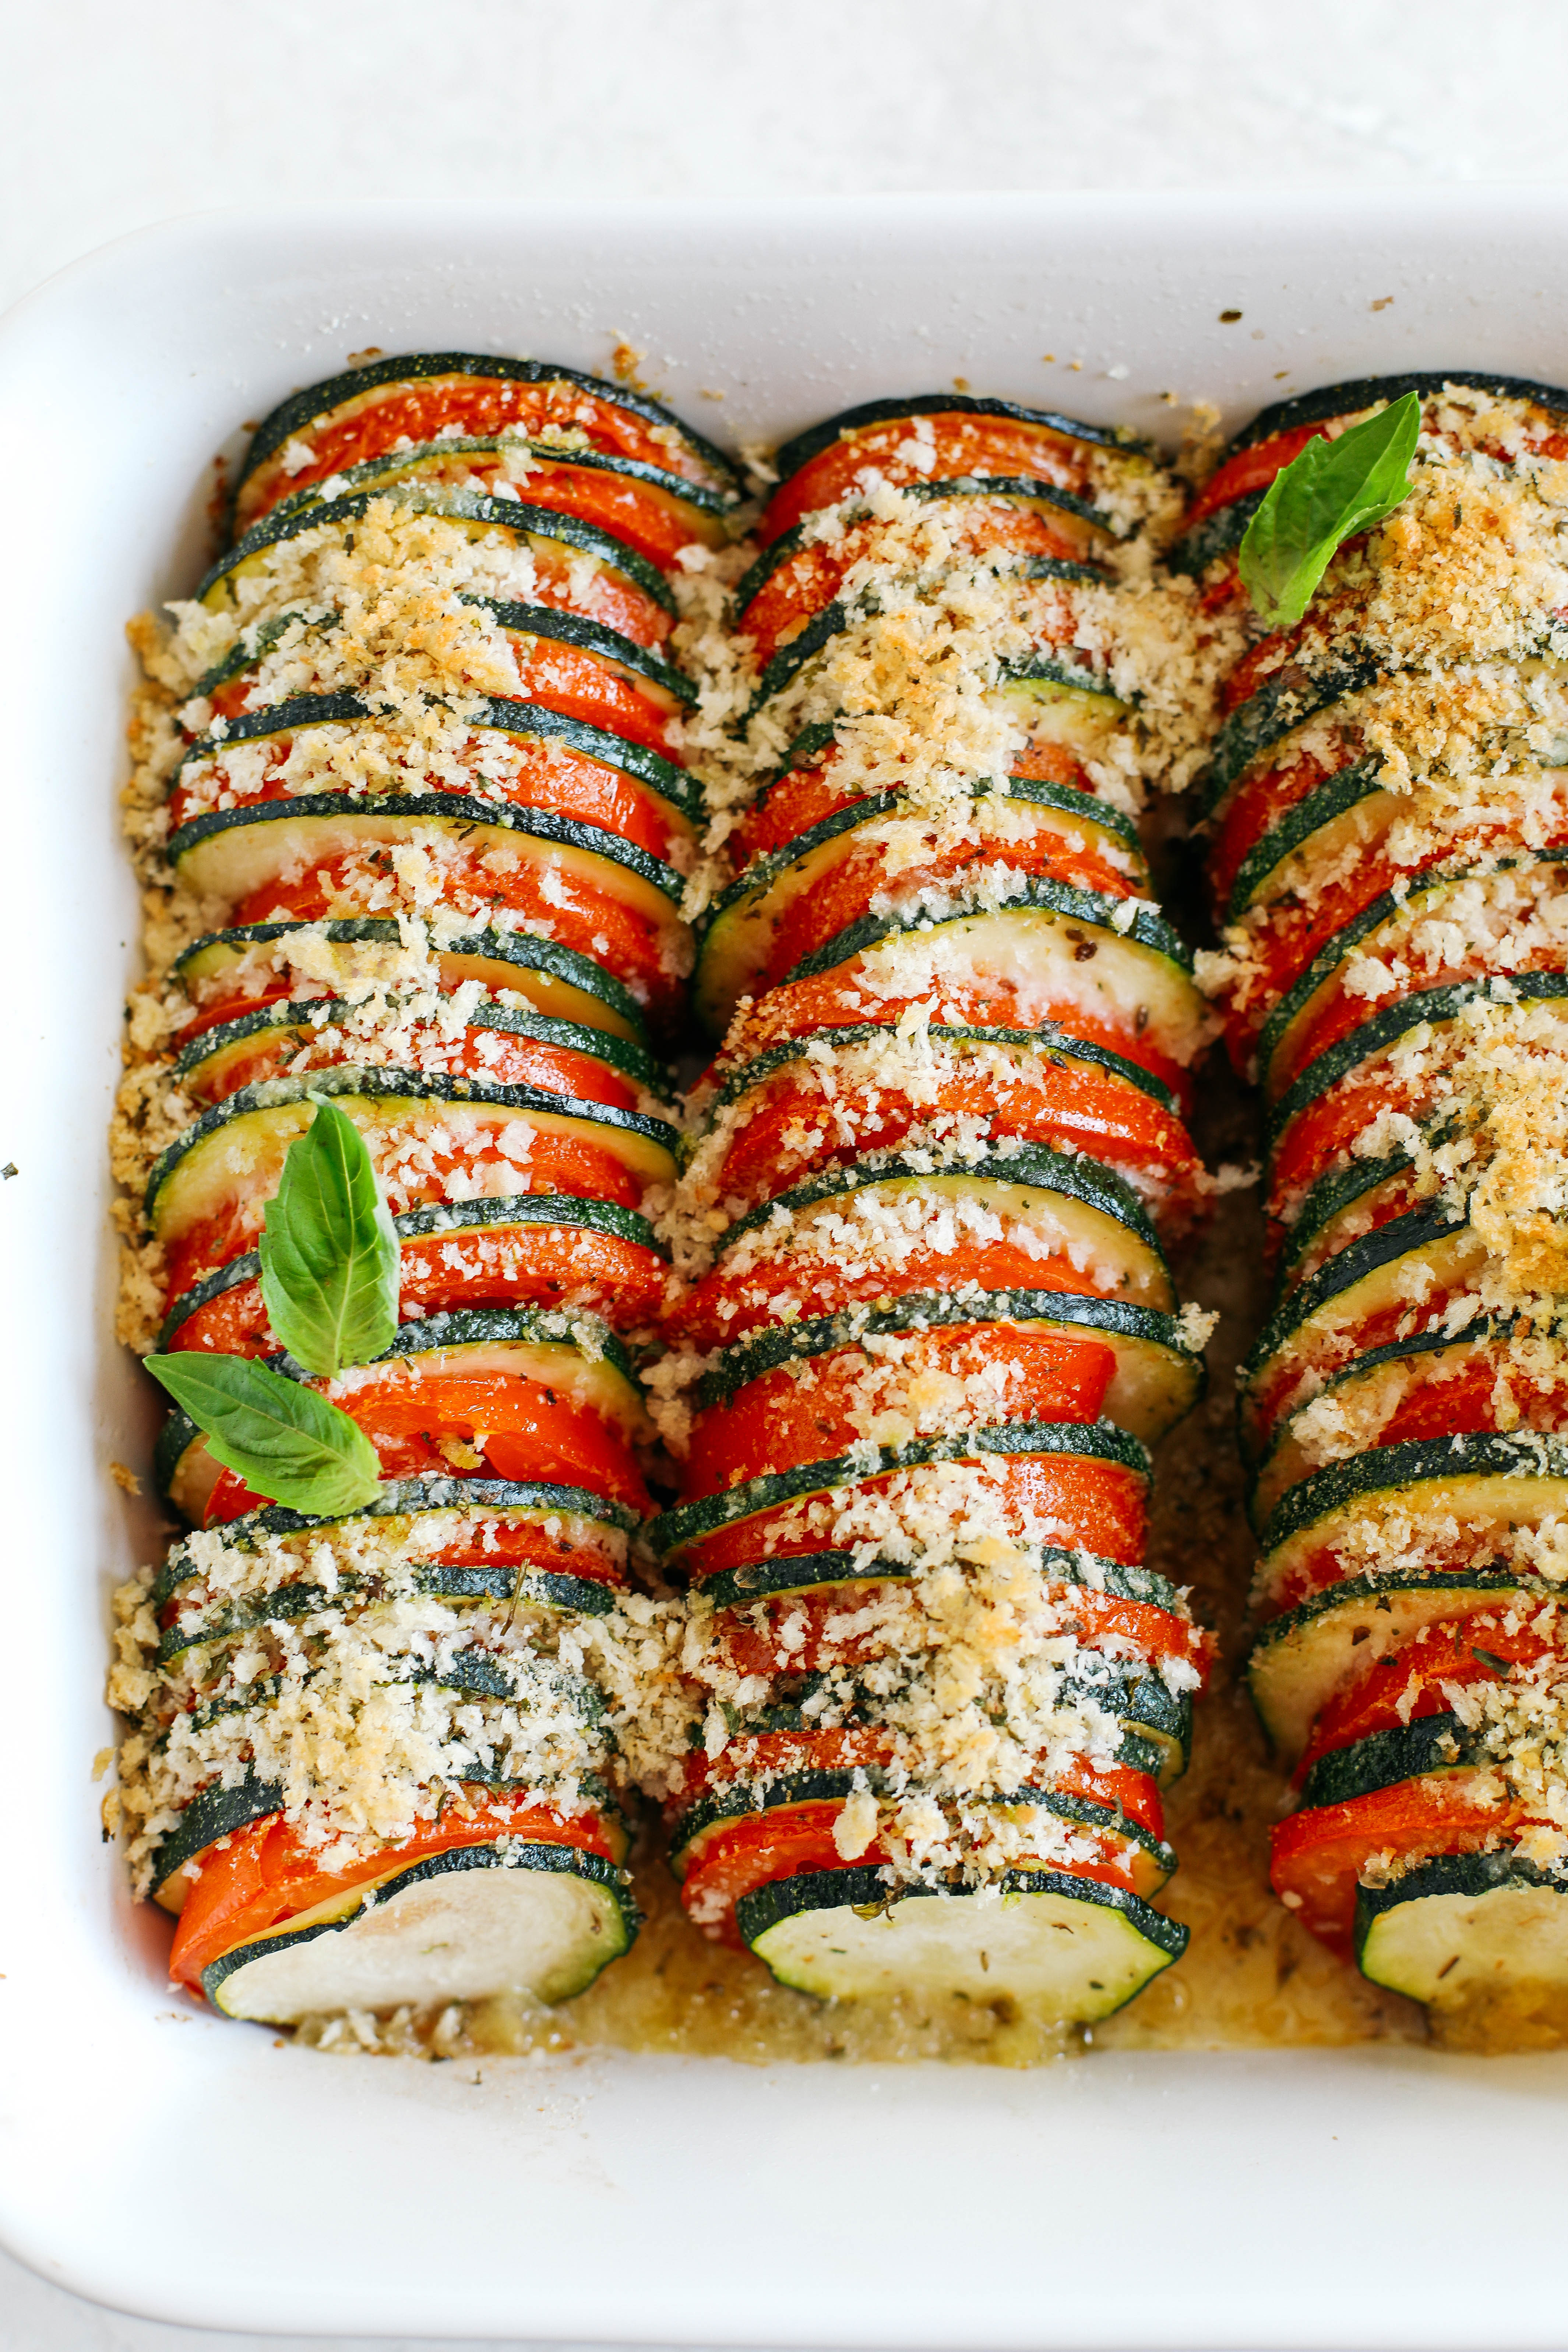 This Summer Zucchini and Tomato Gratin is filled with layers of delicious veggies all topped with a cheesy, crunchy herb topping that is baked to perfection!  